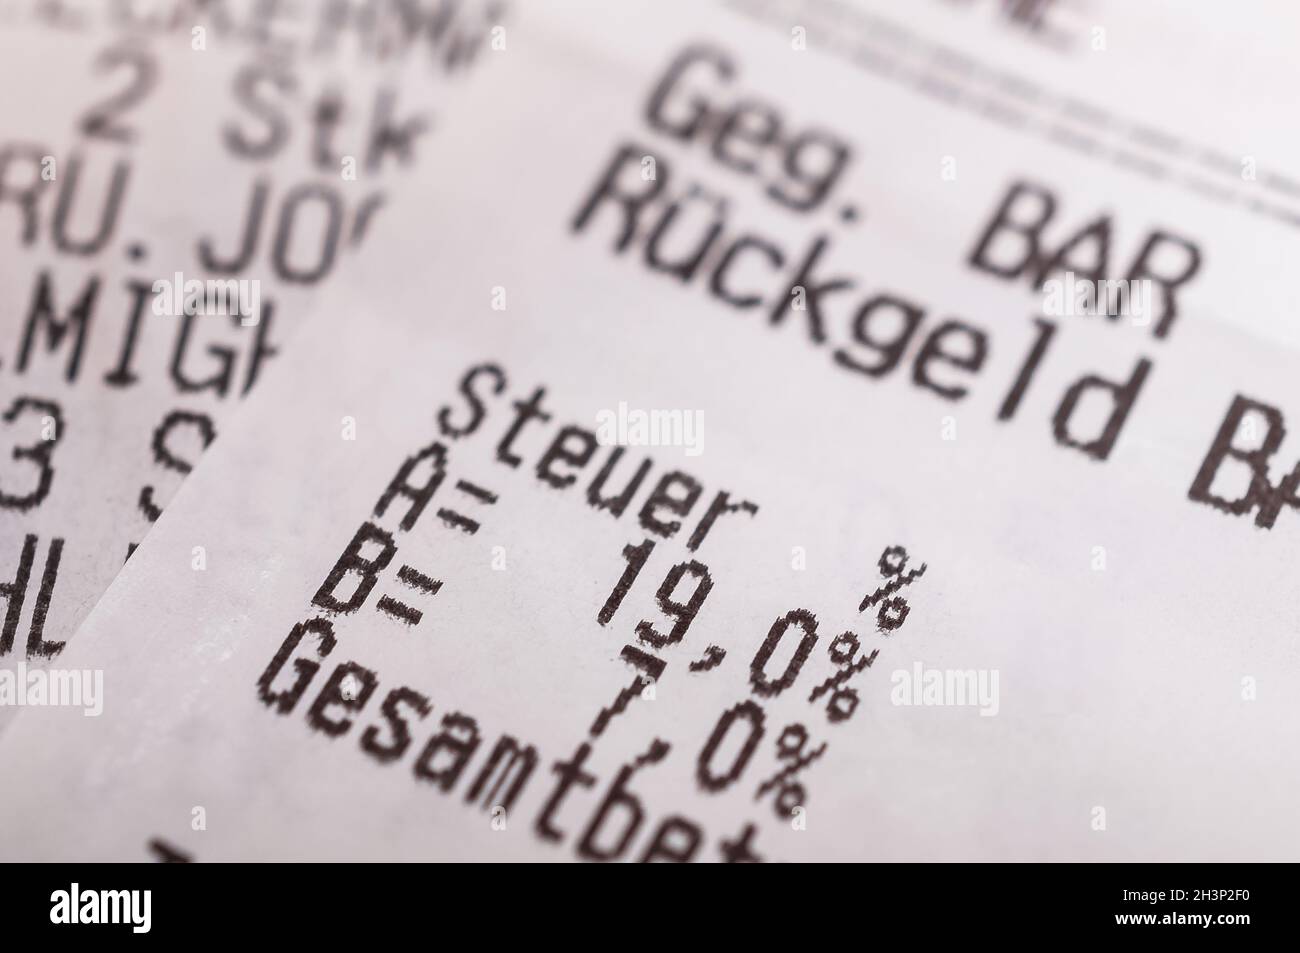 Value-added tax 19% Germany Stock Photo